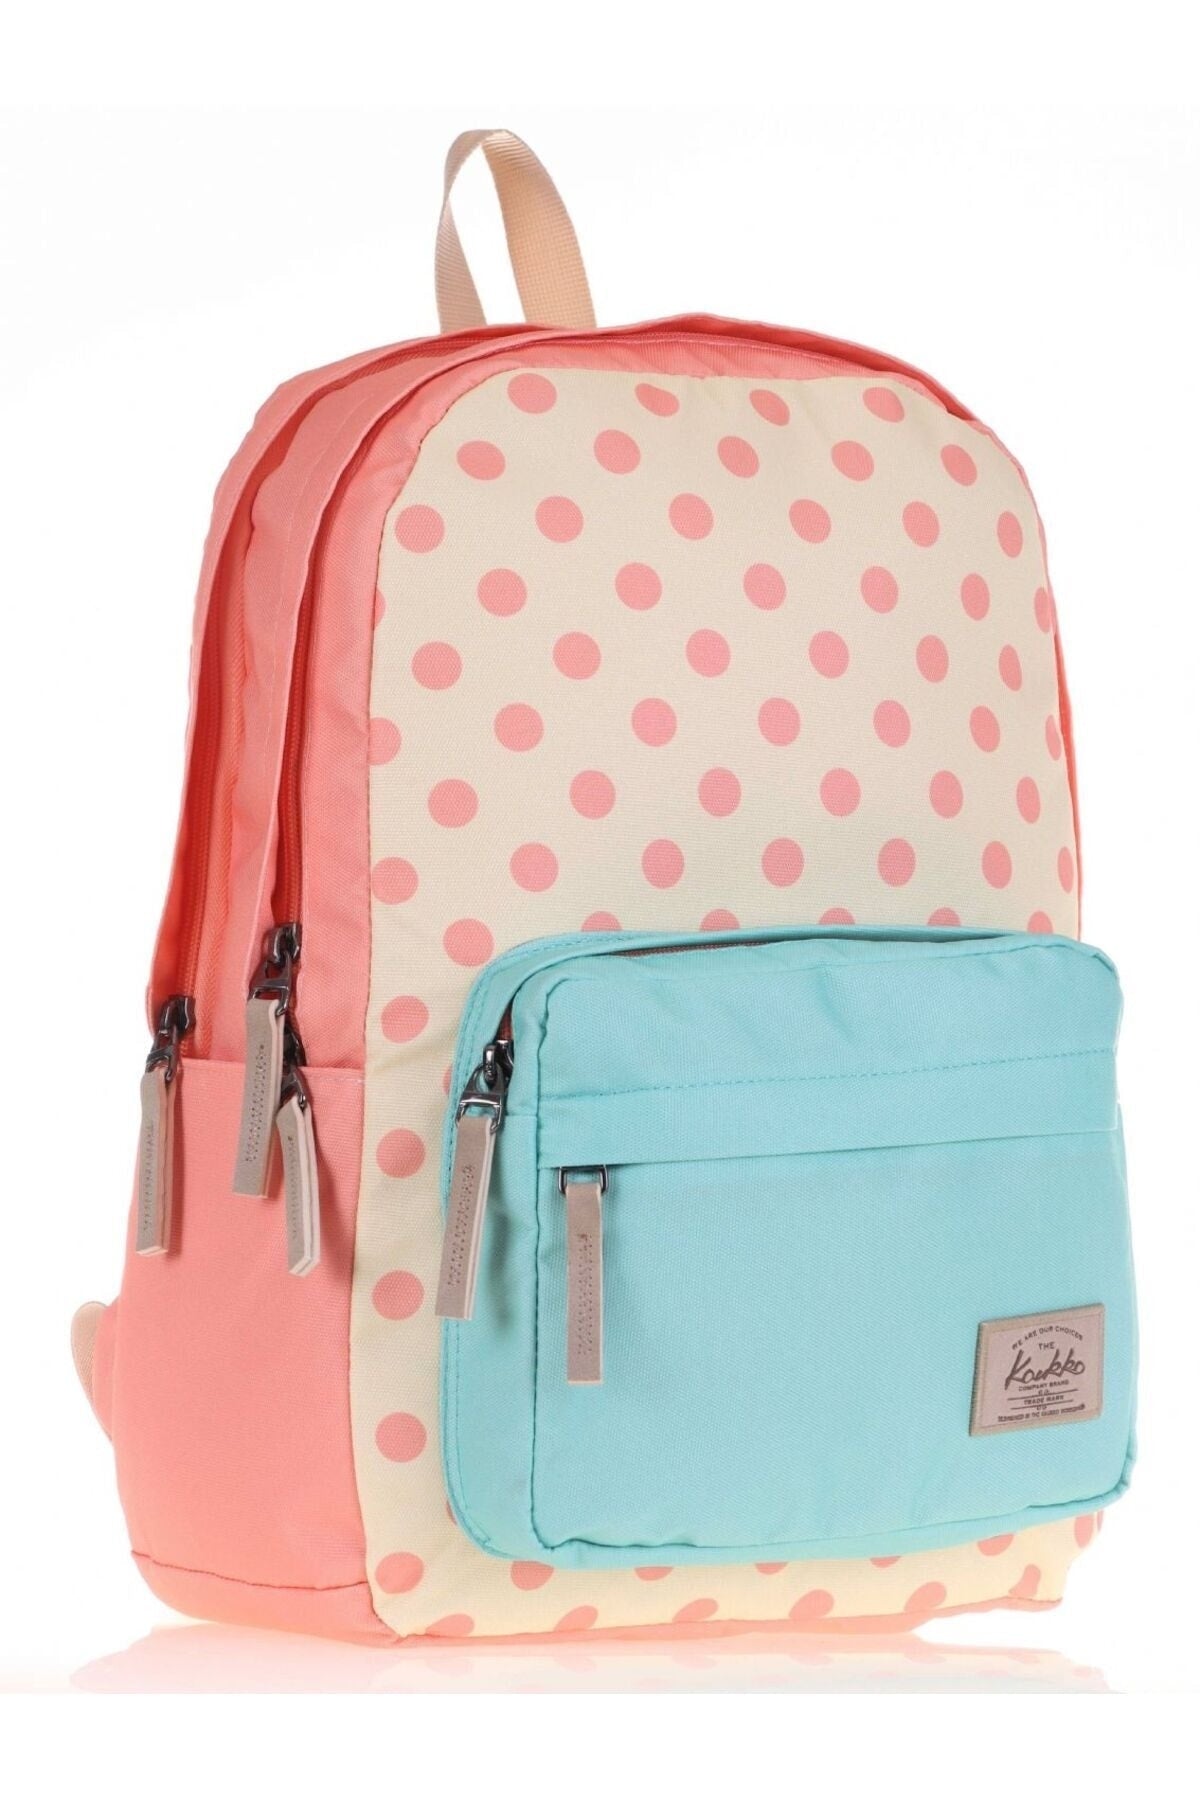 Pink Green Polka Dot Primary School Middle School Bag and Pencil Holder Set - Girls